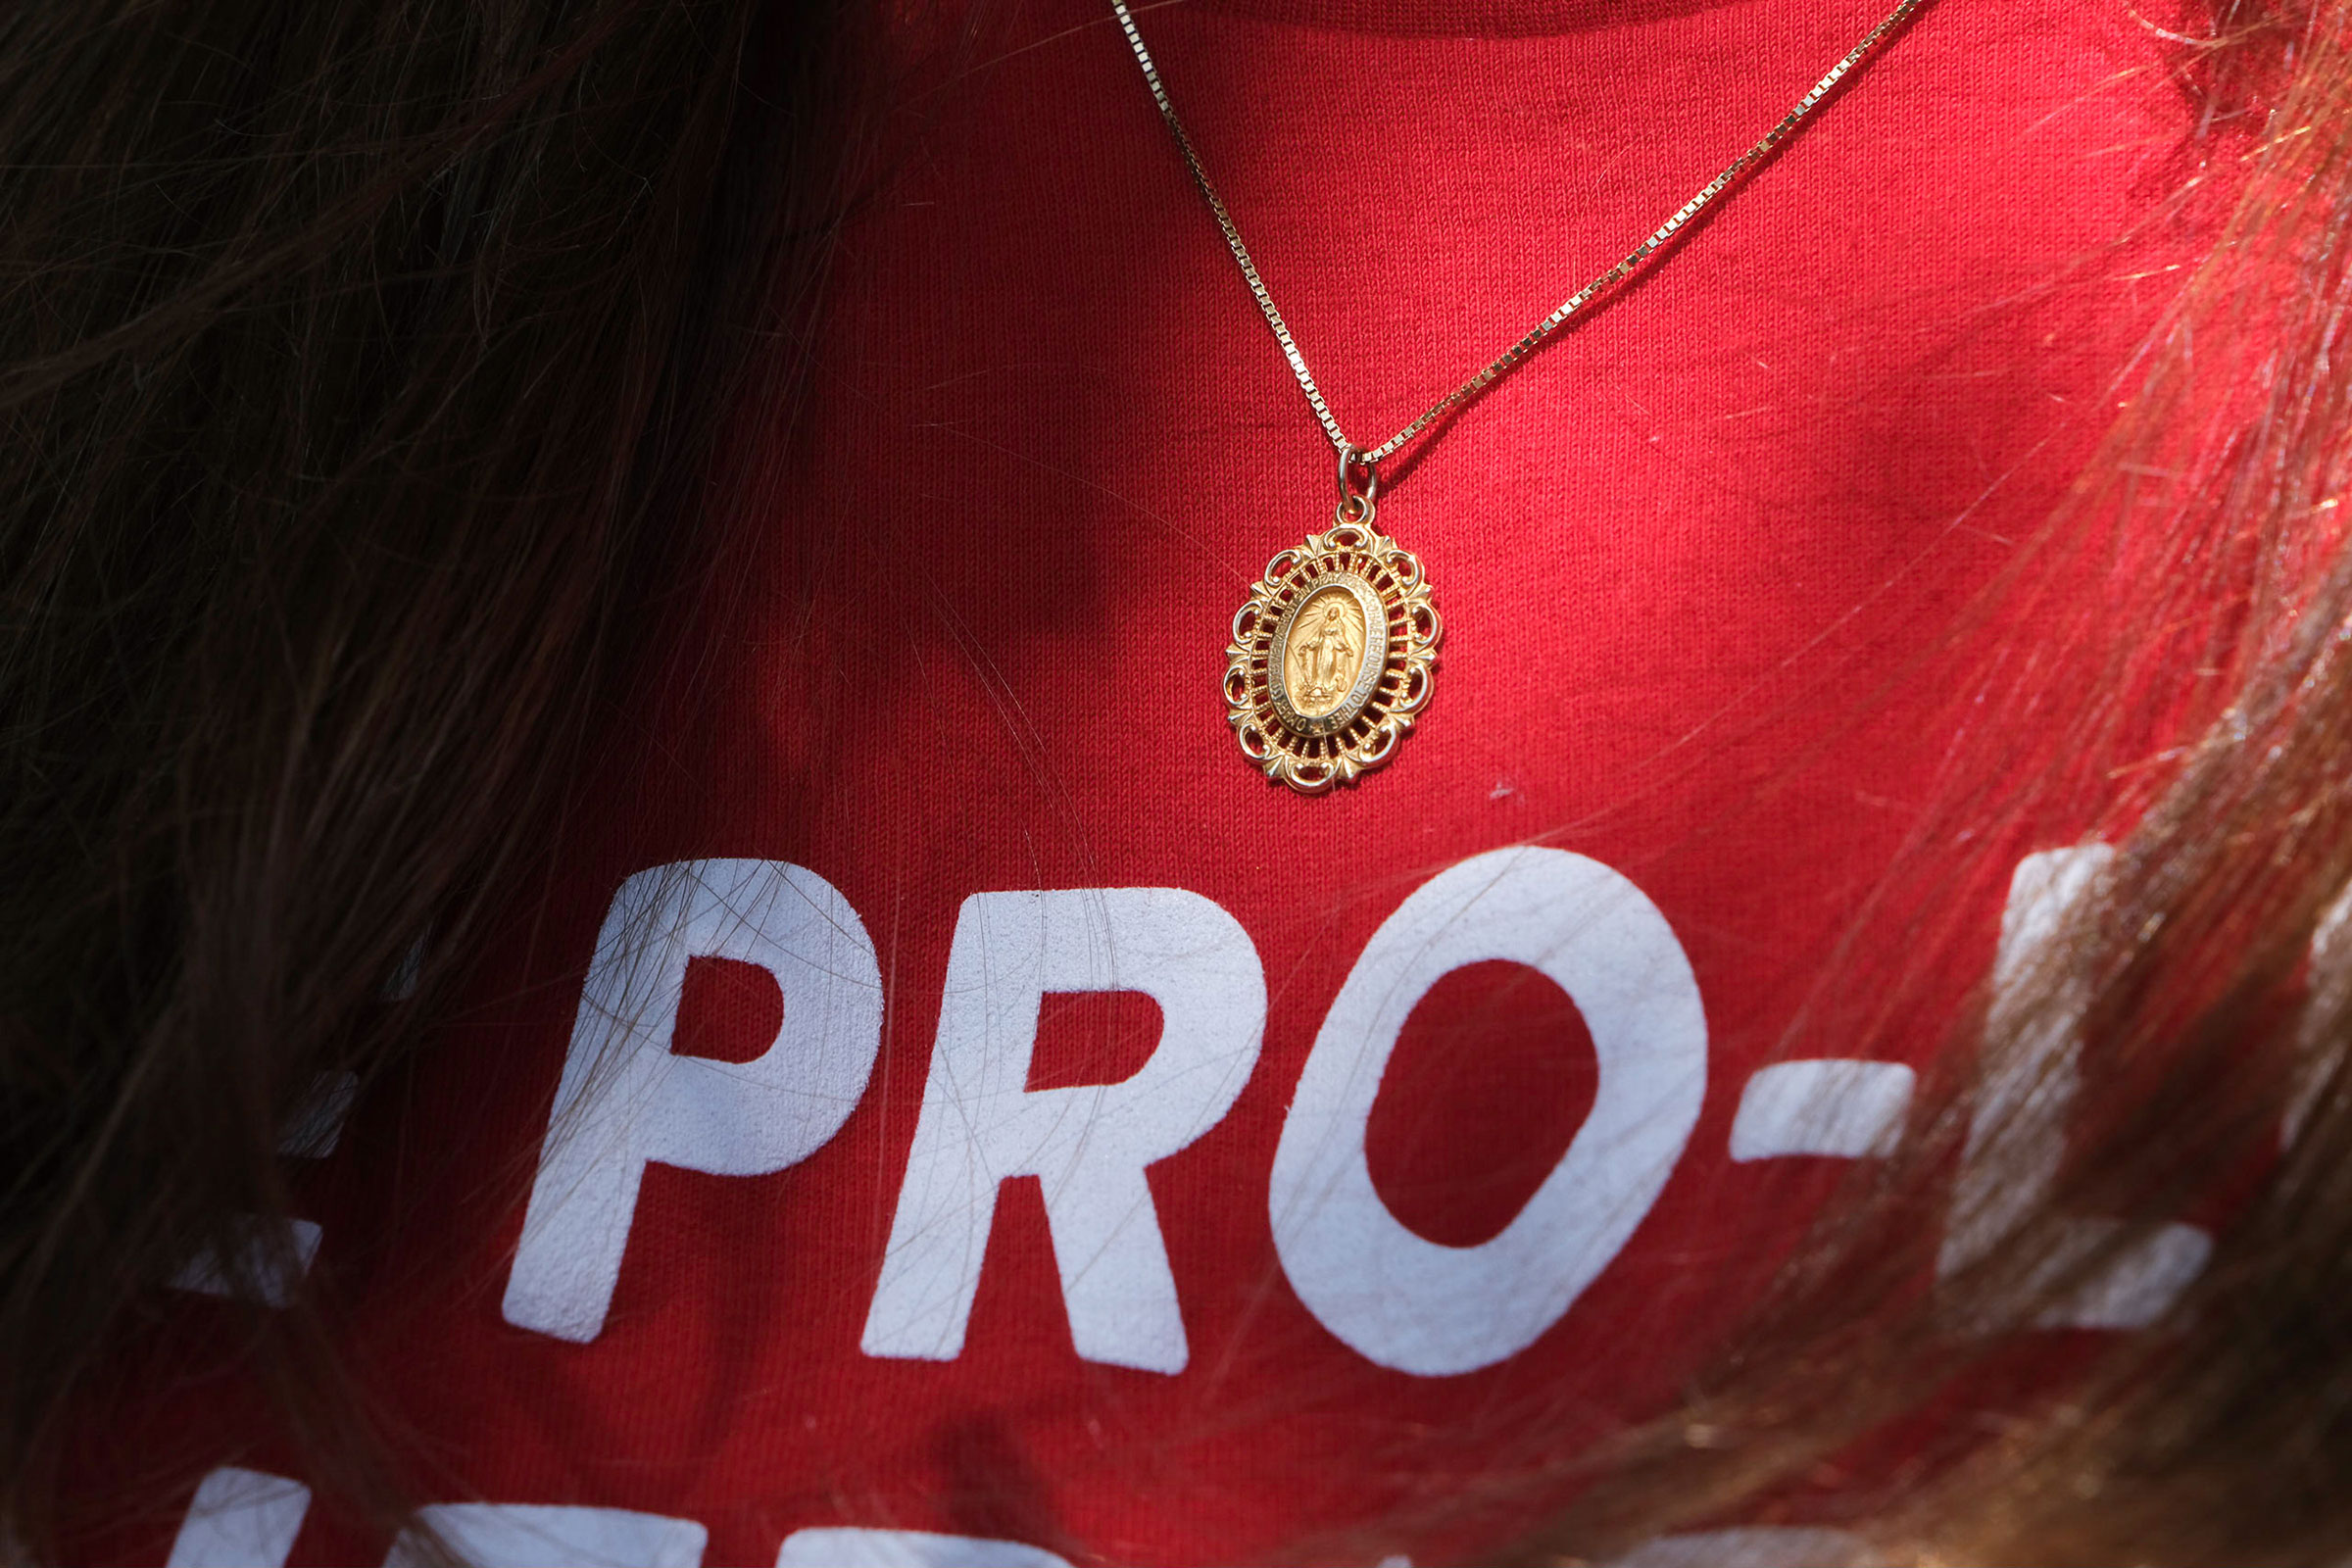 A volunteer with Students for Life of America wears a Miraculous Medal pendant and a shirt that says "The Pro-Life Generation Votes" while canvassing on July 23. (Arin Yoon for TIME)